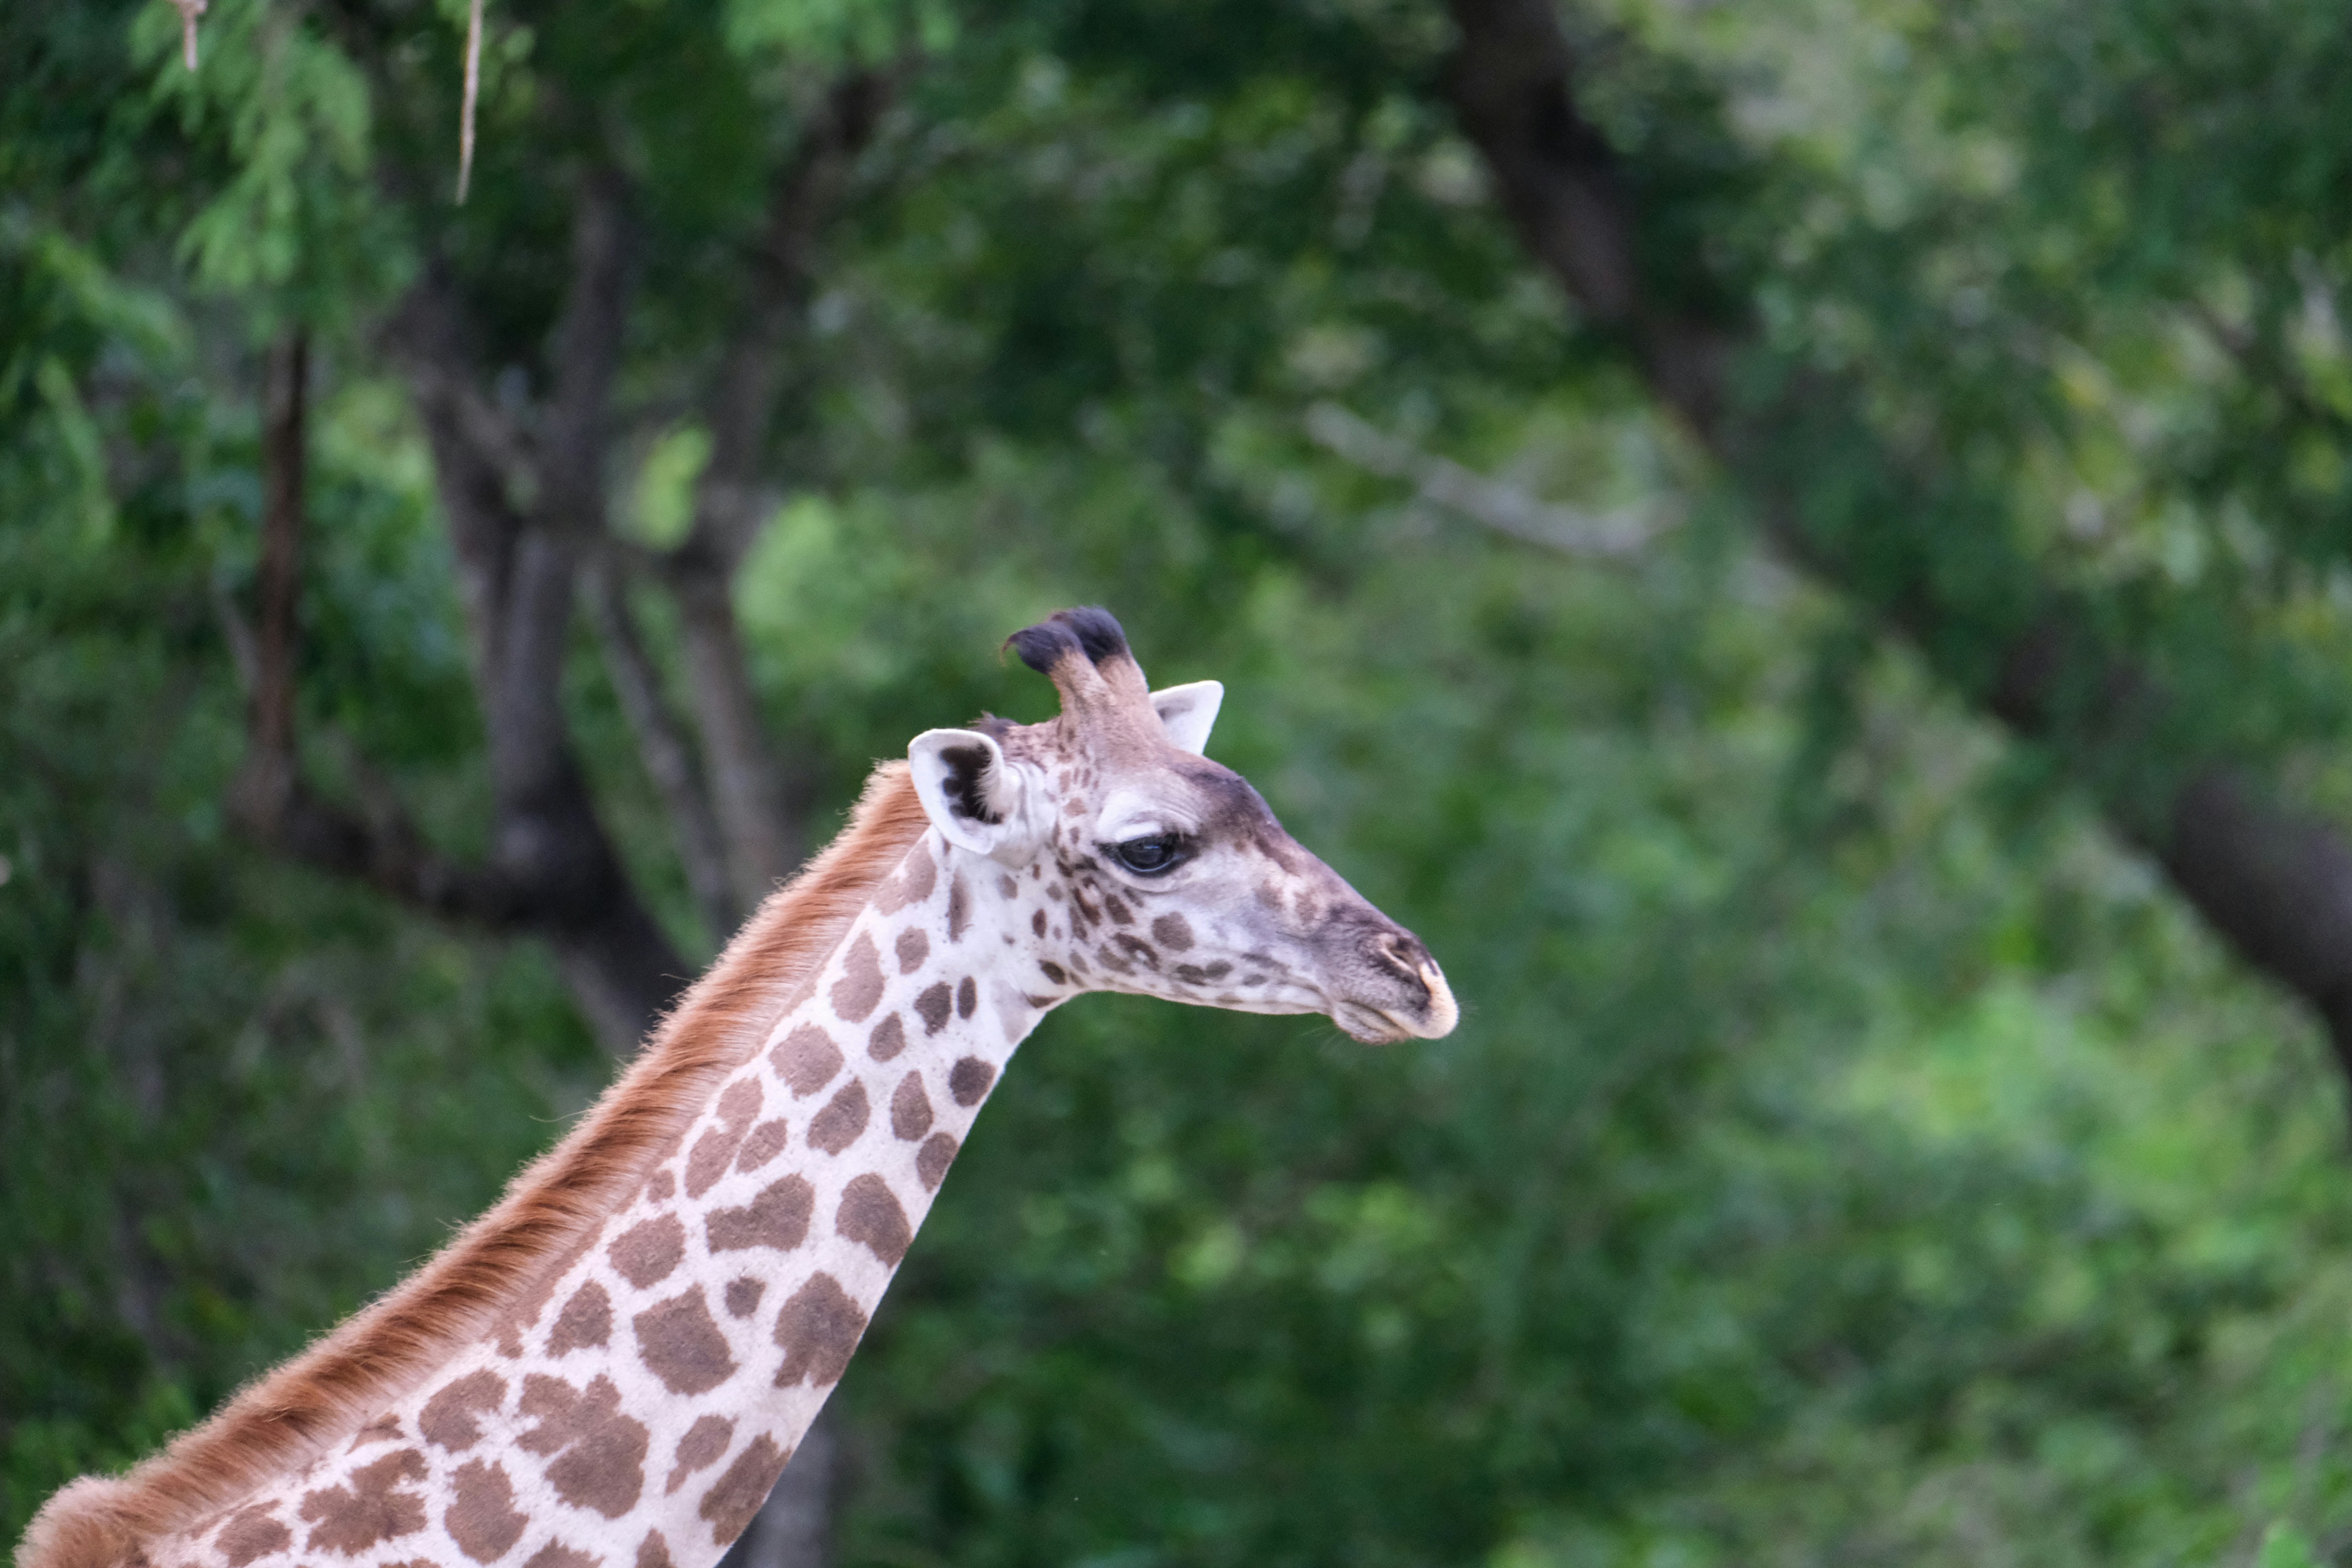 Giraffe photographed in the Selous Game Reserve in Tanzania in January 31, 2020. Giraffe, Selous Game Reserve, Selous National Park, Tanzania, wildlife safari, conservation, Tanzania wildlife, conservation tourism, East Africa, giraffe close up.